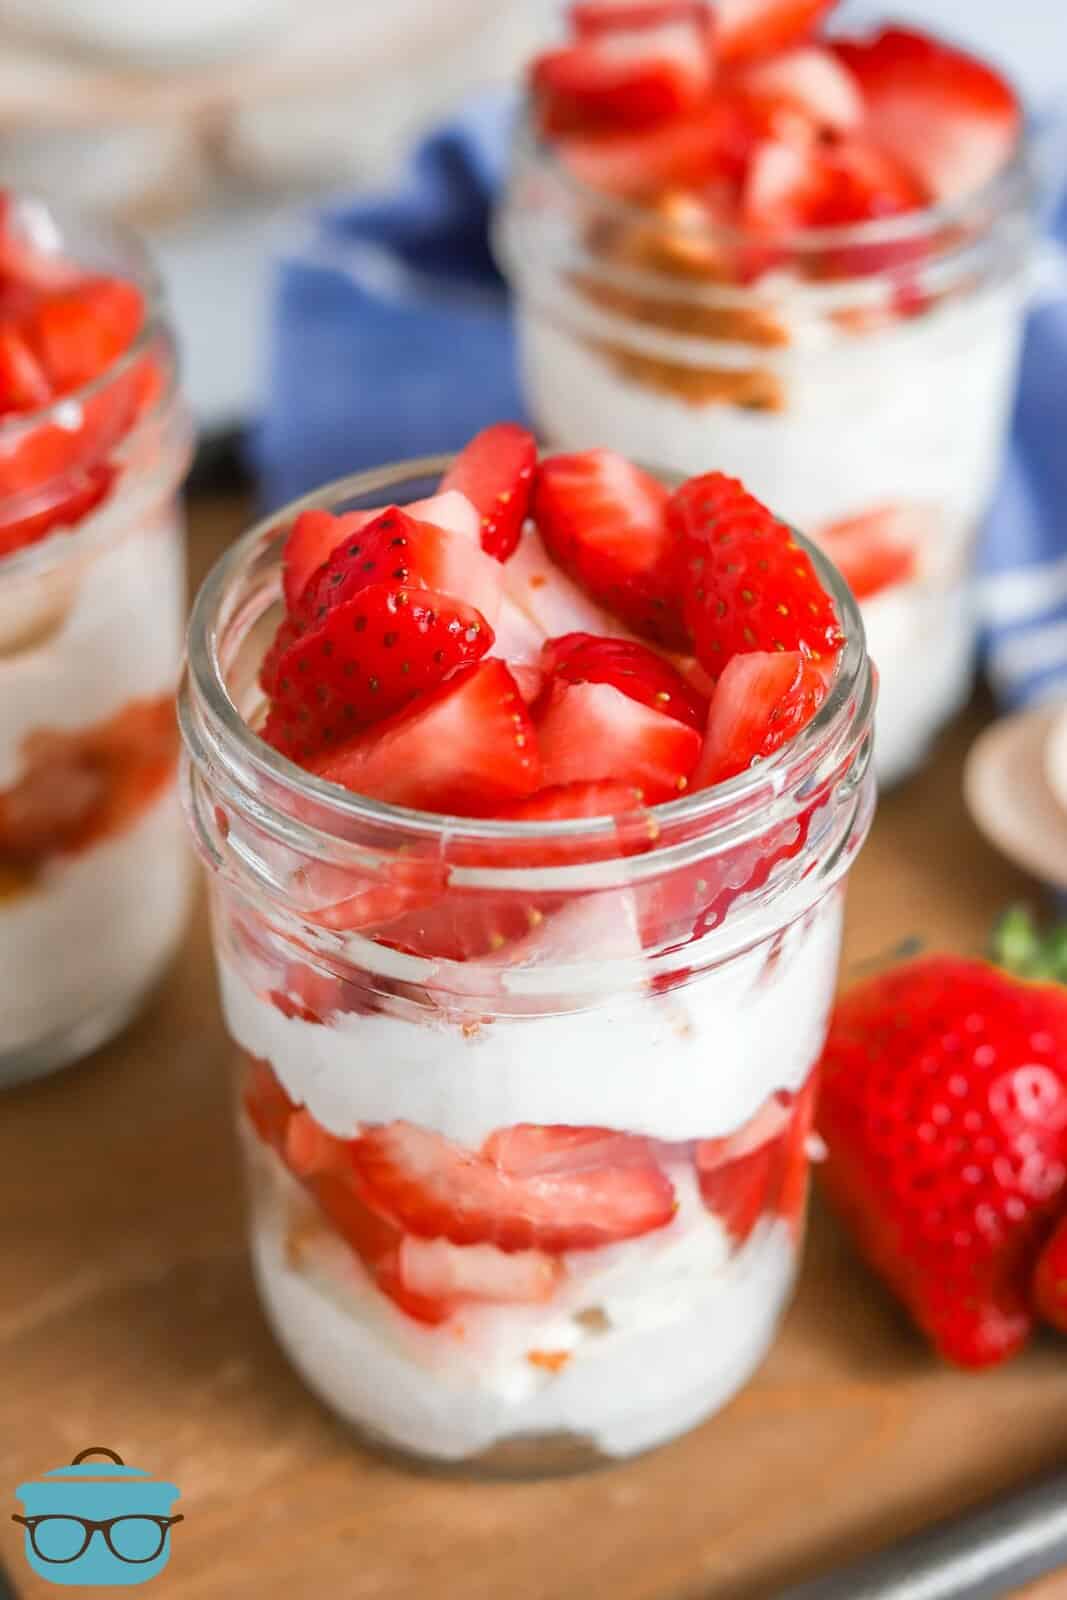 Overhead of one Strawberry Shortcake in a Jar showing strawberry topping.